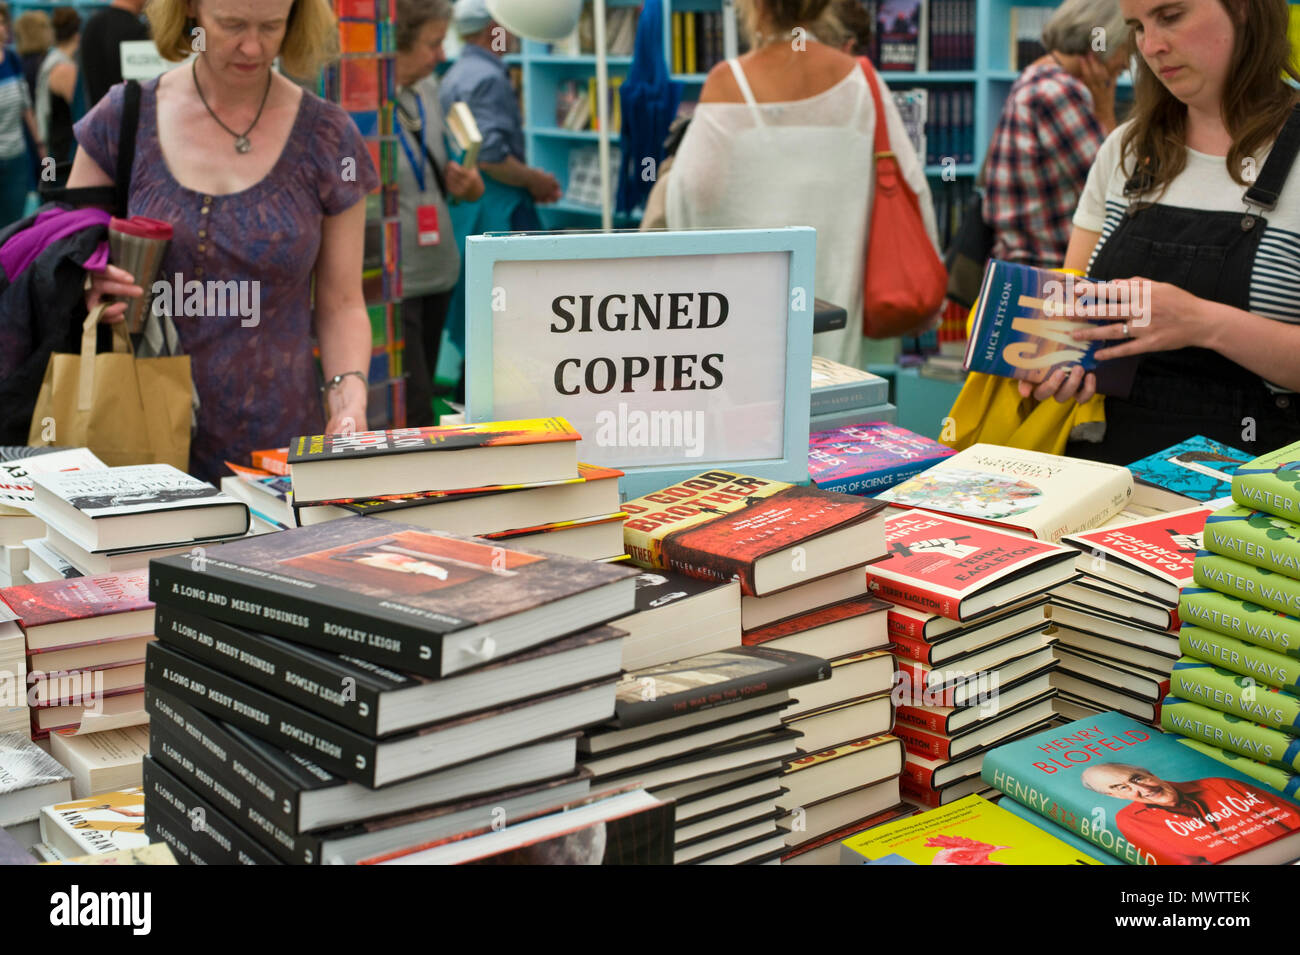 People browsing author signed copies of their books in the book shop at Hay Festival 2018 Hay-on-Wye Powys Wales UK Stock Photo